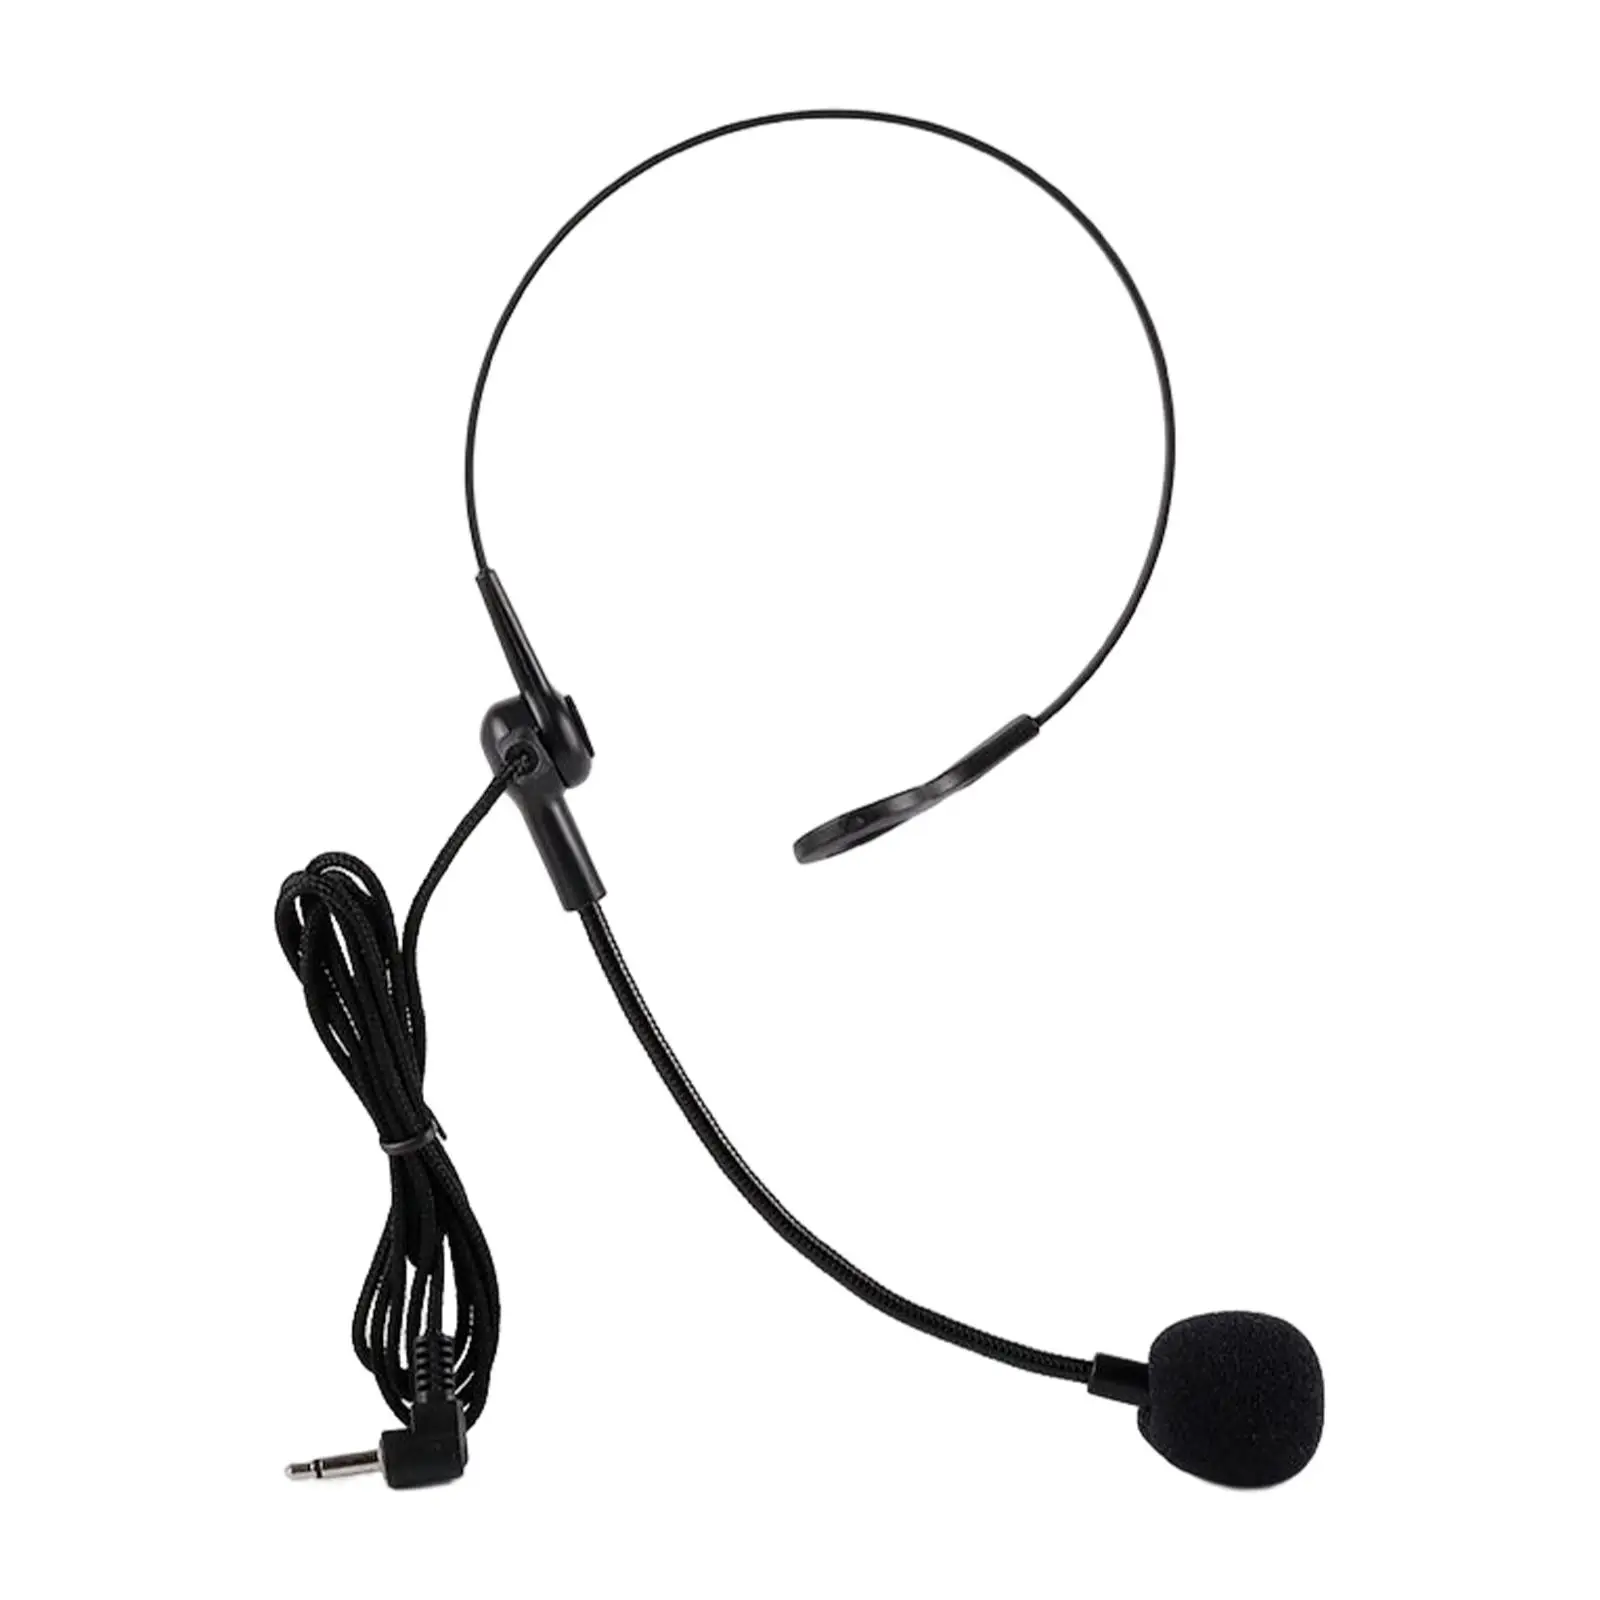 Headset Microphone Hand Free Stereo Headset Adjustable Headphone for Teaching Tour Guide